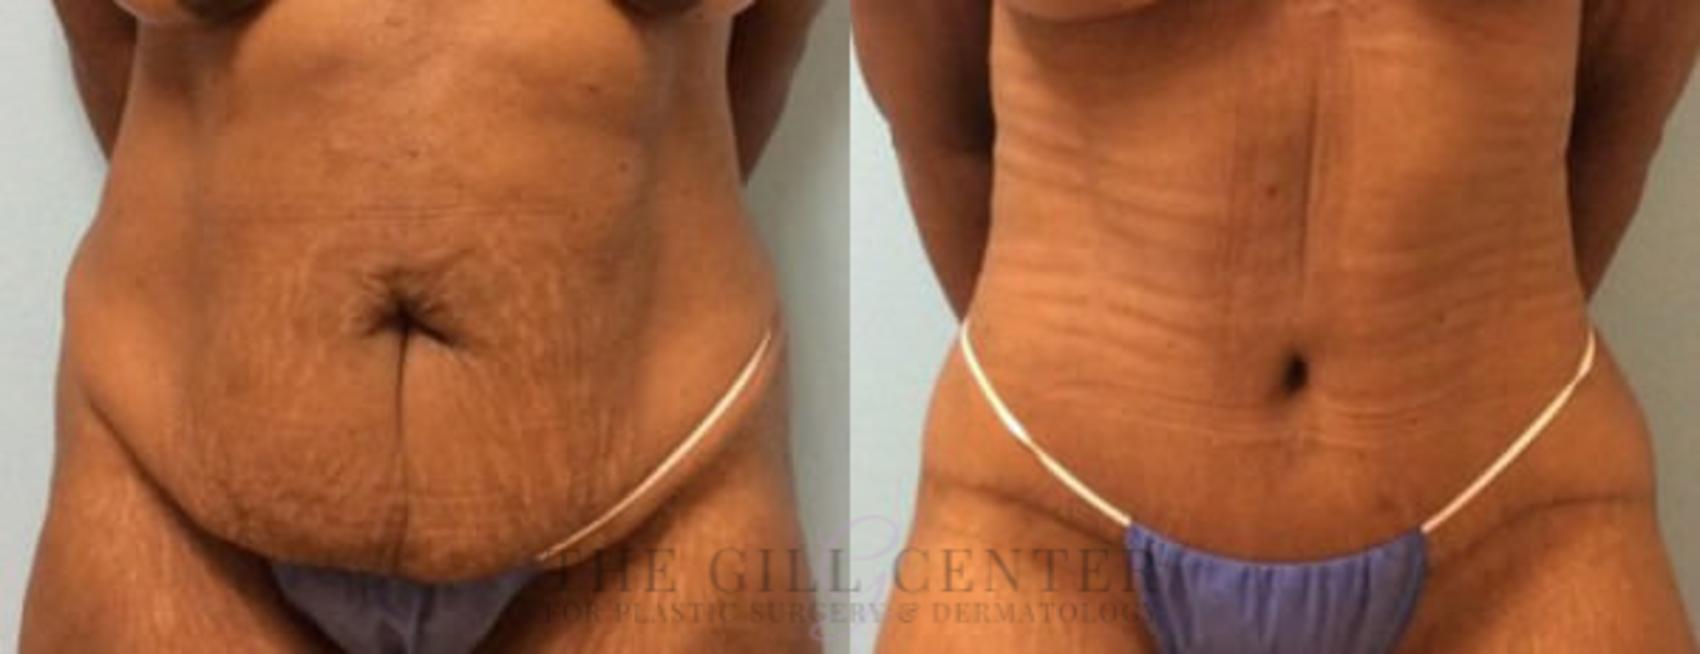 Tummy Tuck Case 194 Before & After Front | The Woodlands, TX | The Gill Center for Plastic Surgery and Dermatology